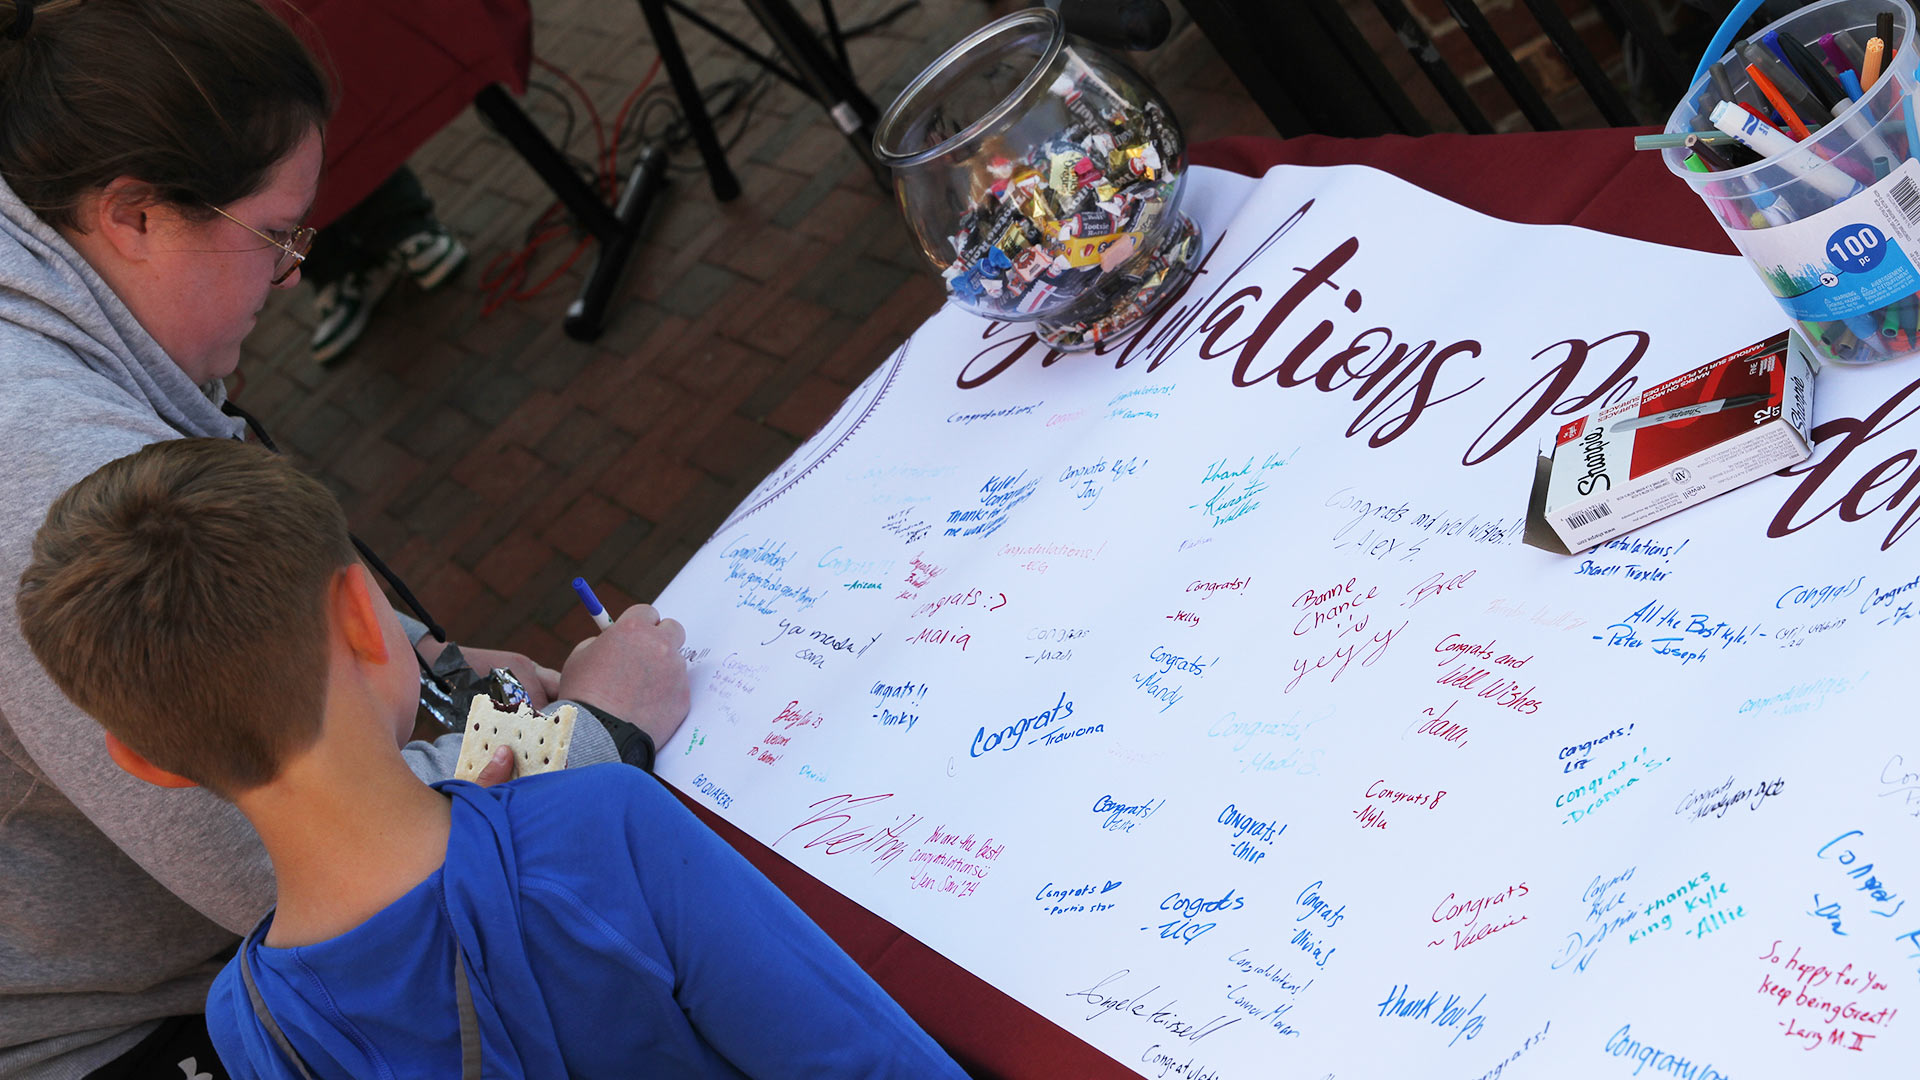 Attendees signed a banner for Kyle Farmbry.